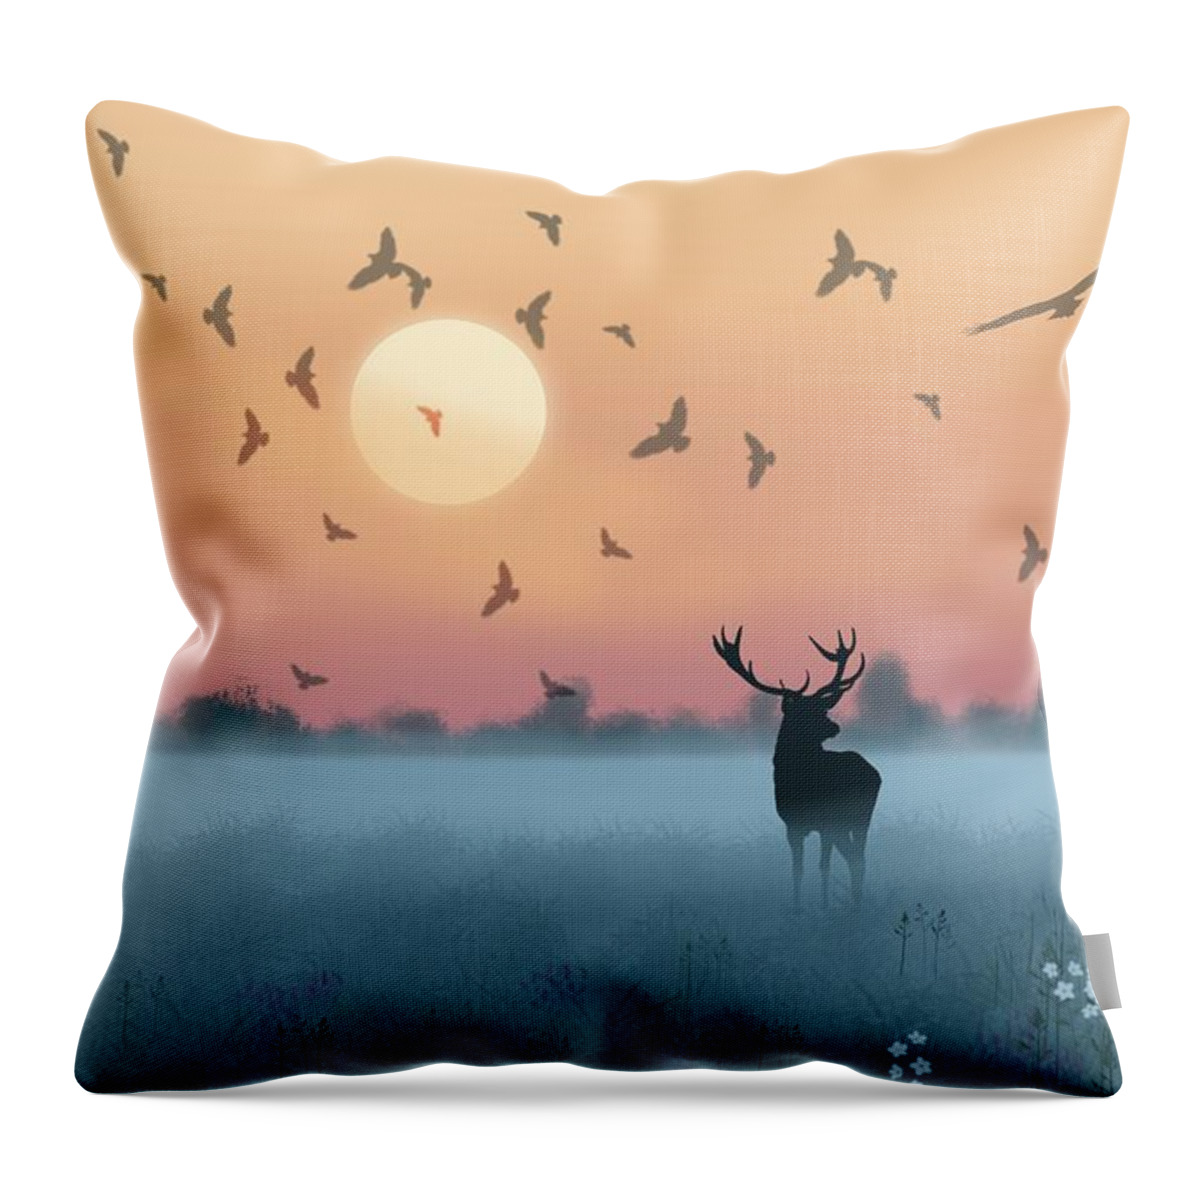 Deer Throw Pillow featuring the digital art Before The Hunters Come by Eva Sawyer